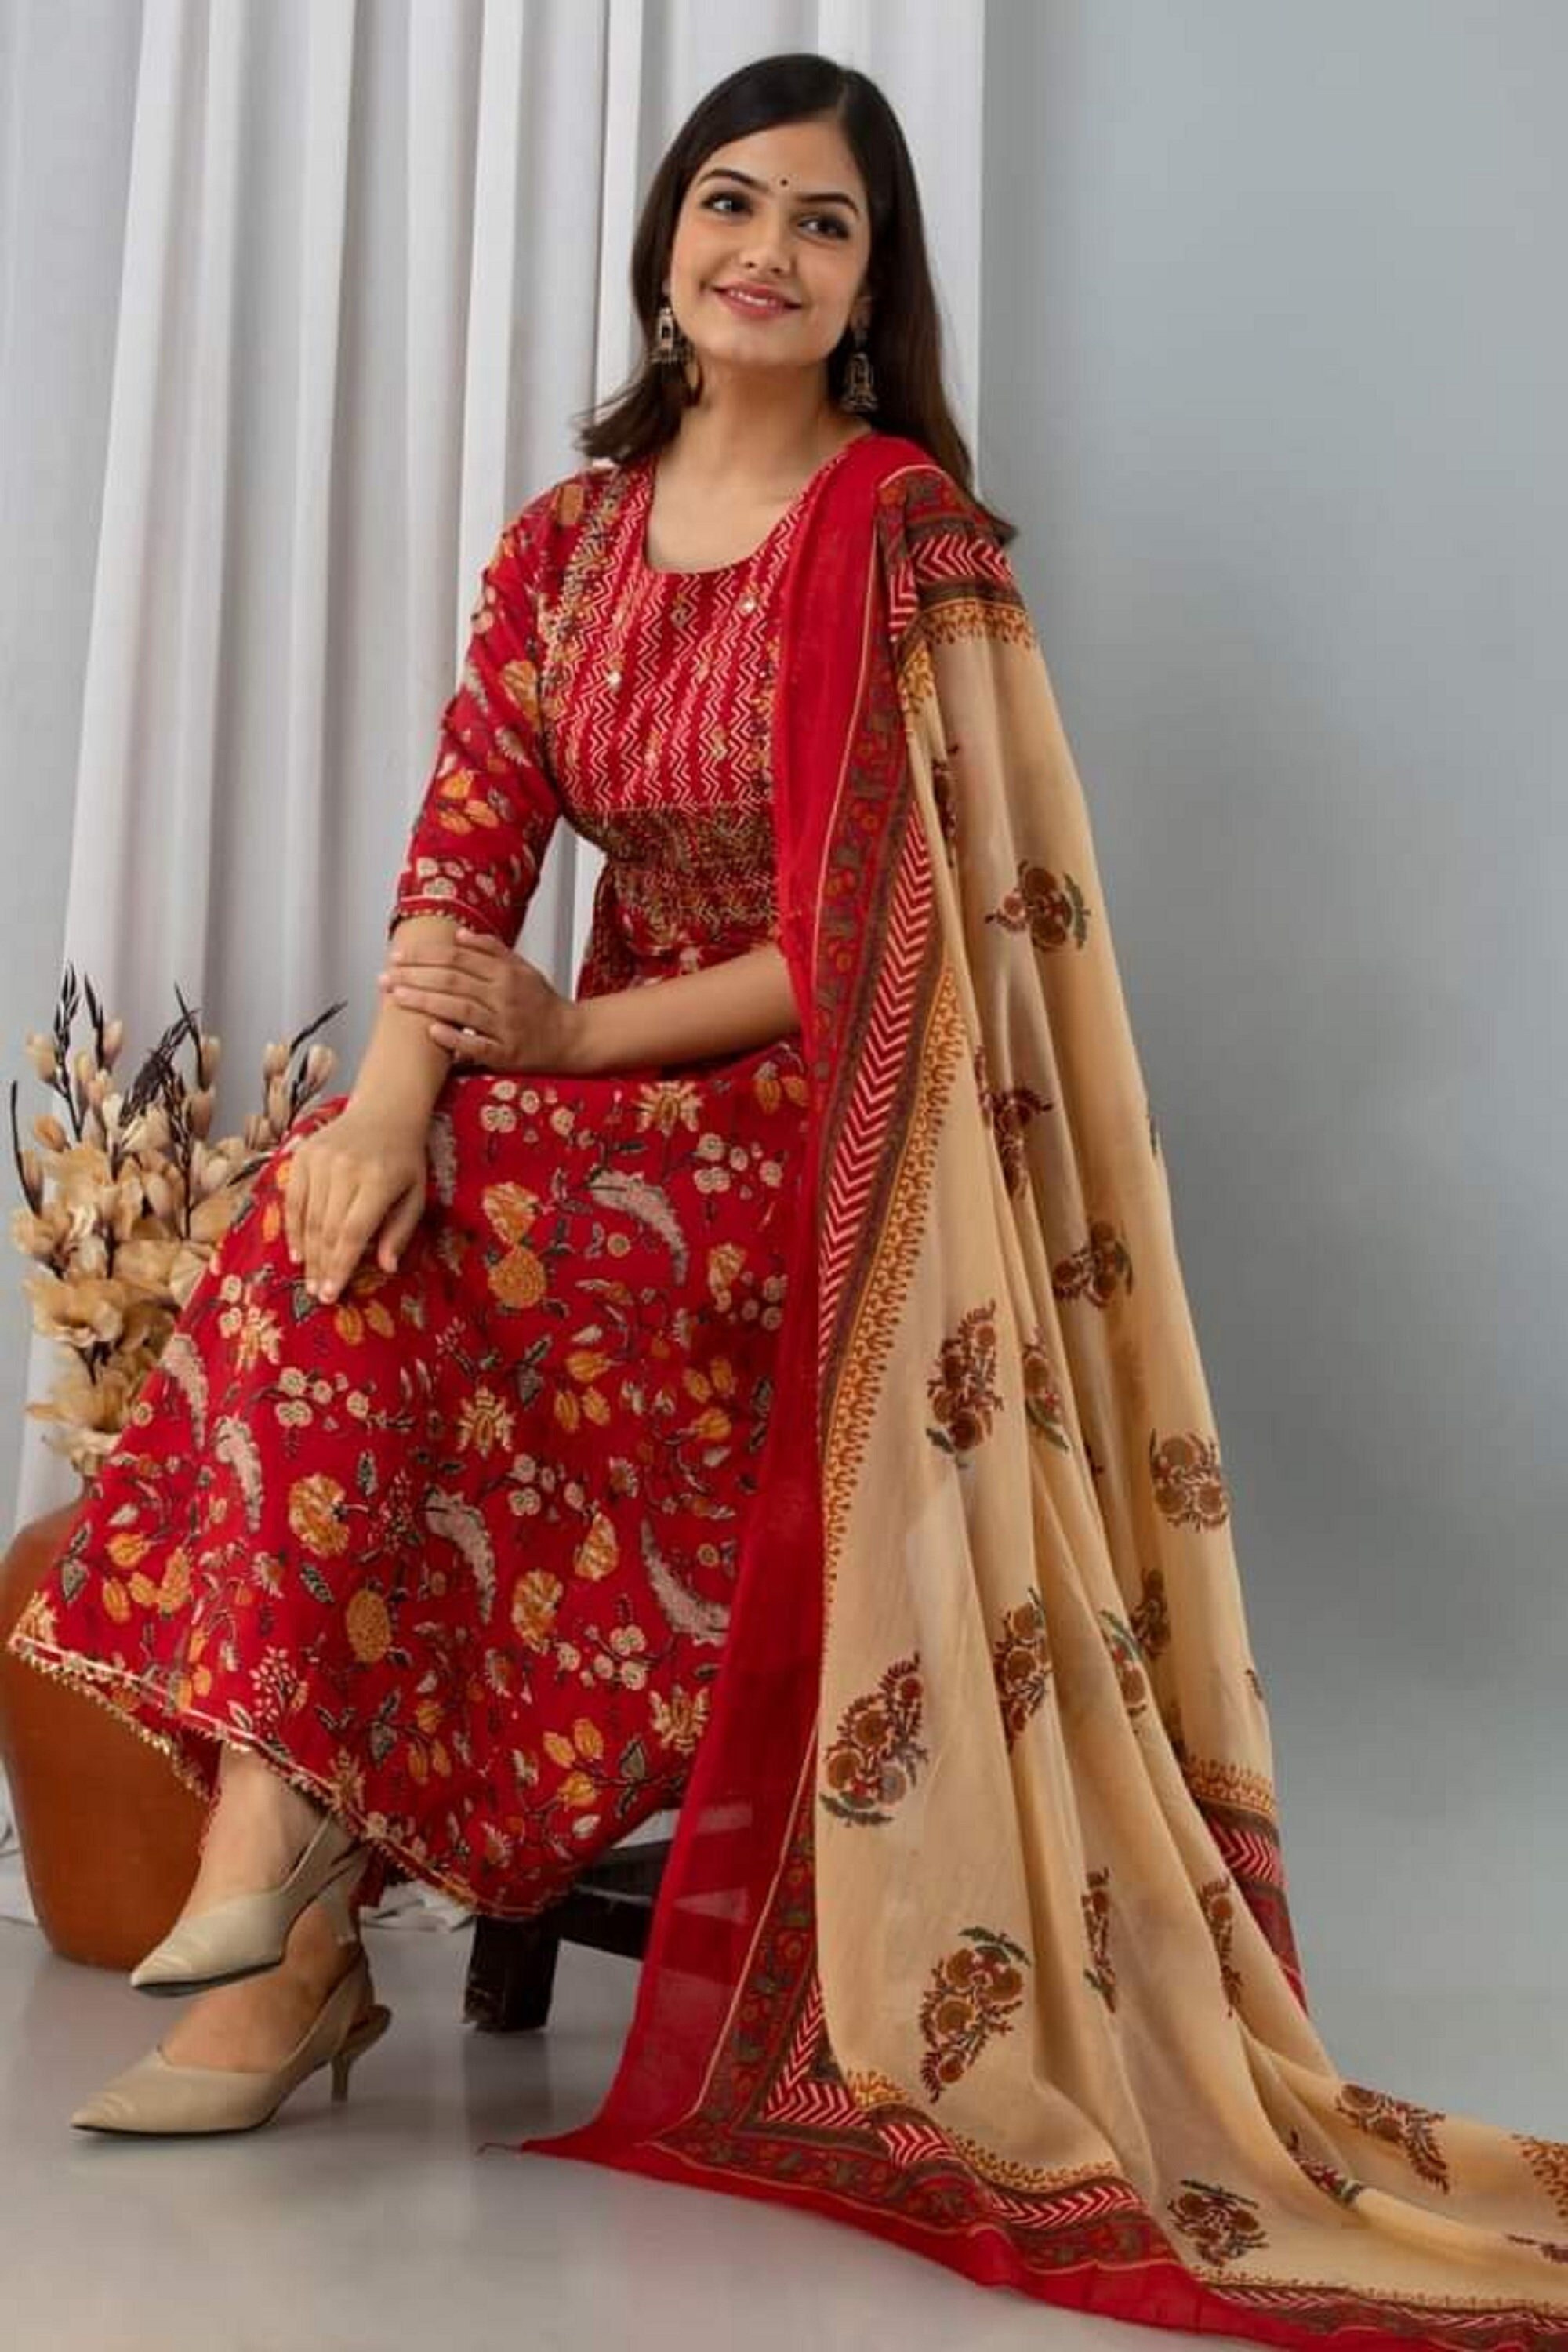 Indian Reyon kurti pant with beautiful Gold Print Chanderi Dupatta,Women Dress Set,Special price For 2 or more orders with DHL shipping